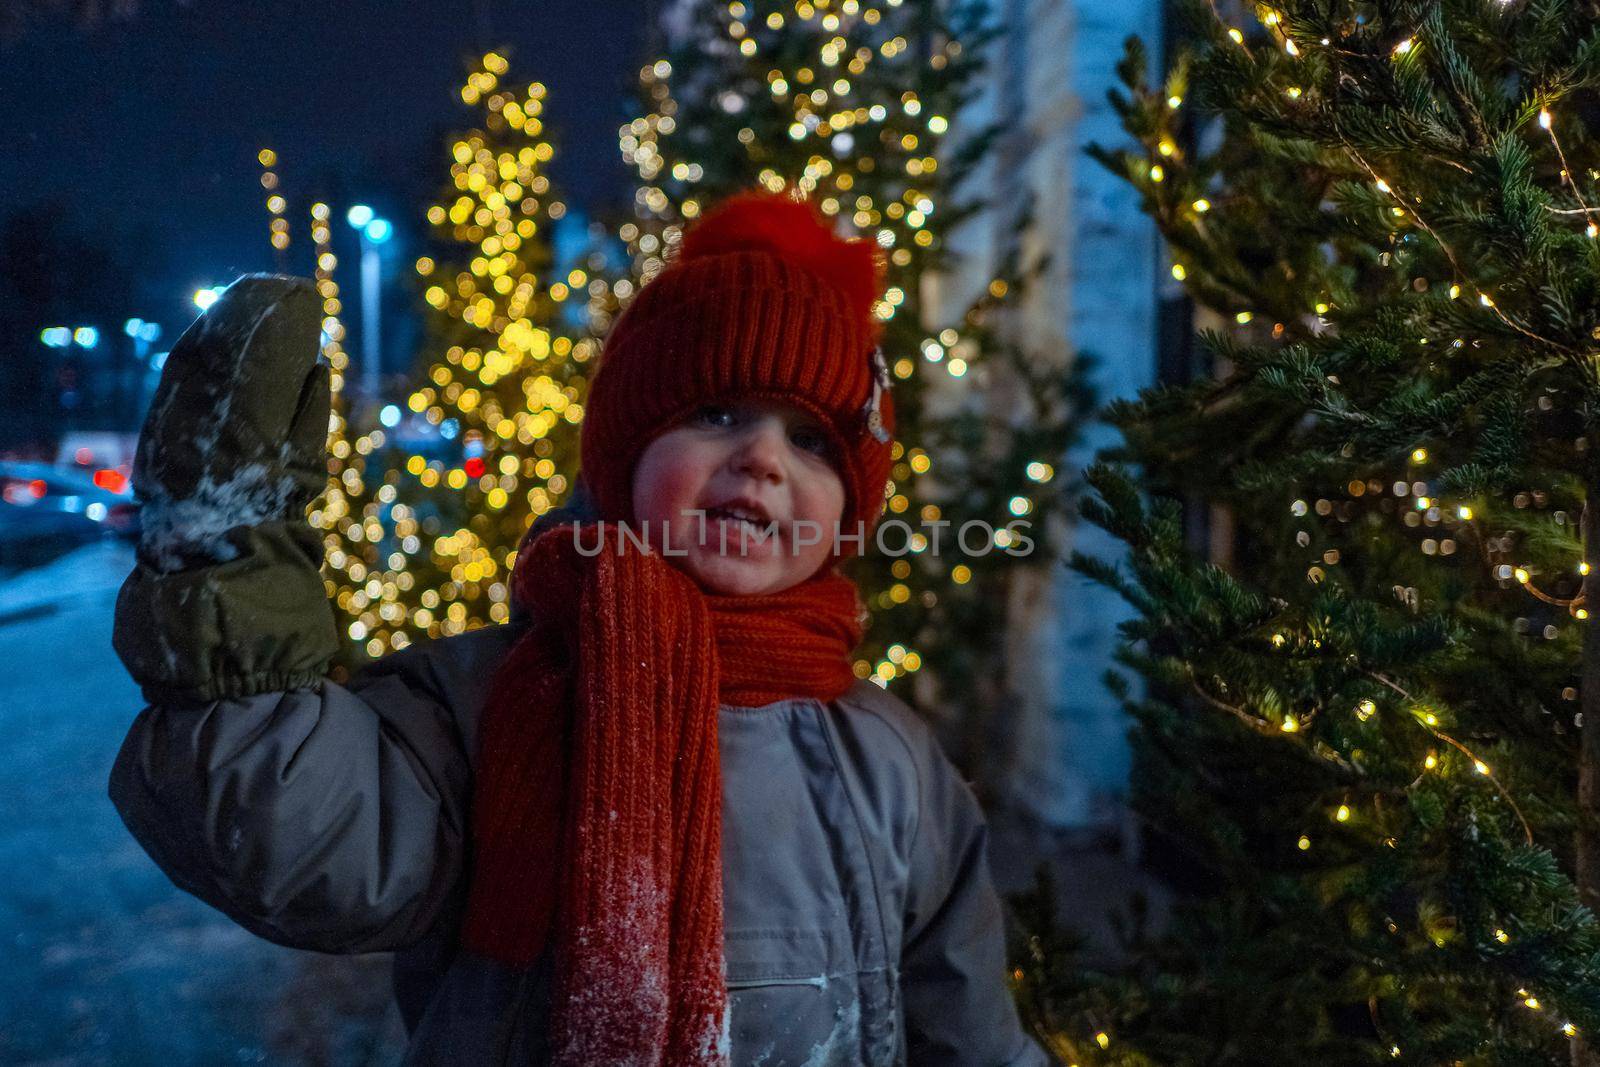 Happy child in warm outerwear waving hand and looking at camera while standing near spruce tree decorated with glowing lights in evening city during Christmas holidays